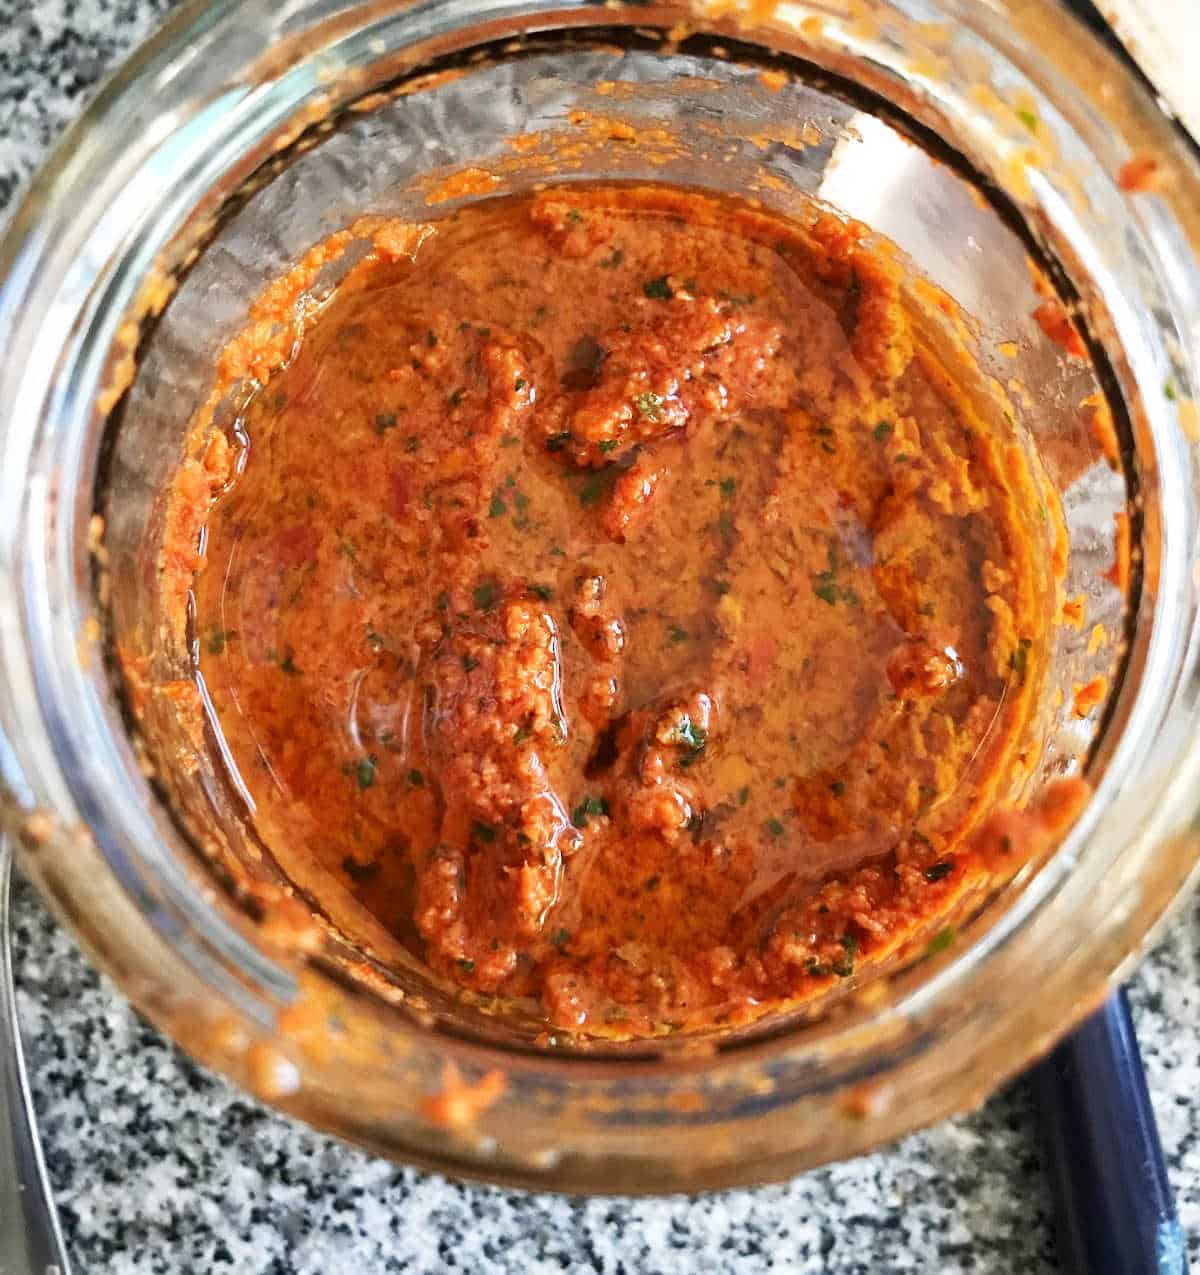 Jar with sun-dried tomato pesto and olive oil. Top view.